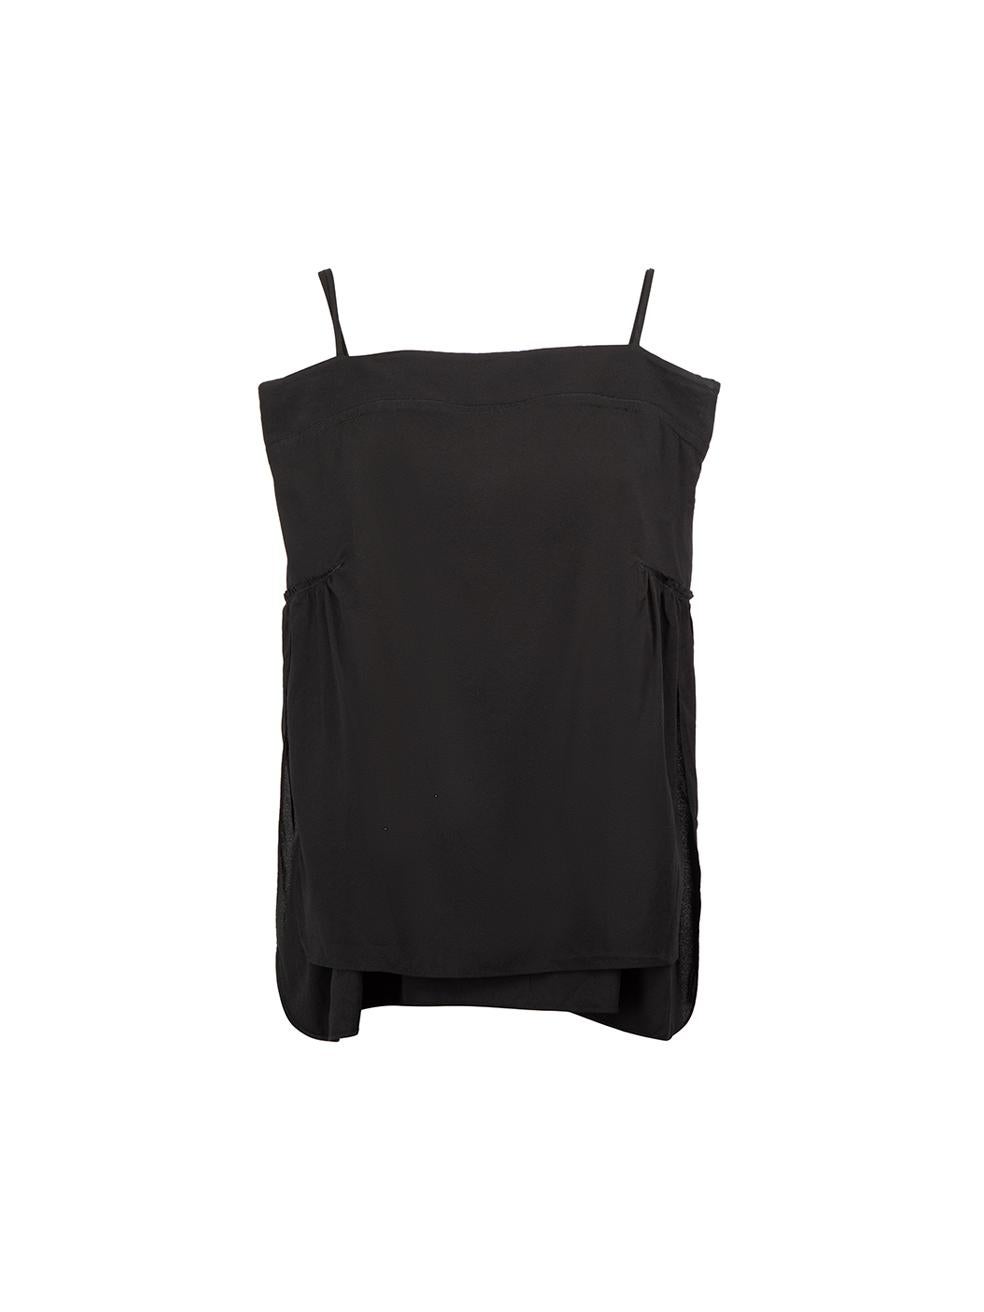 Black Silk Gathered Accent Tank Top Size XS In Good Condition For Sale In London, GB